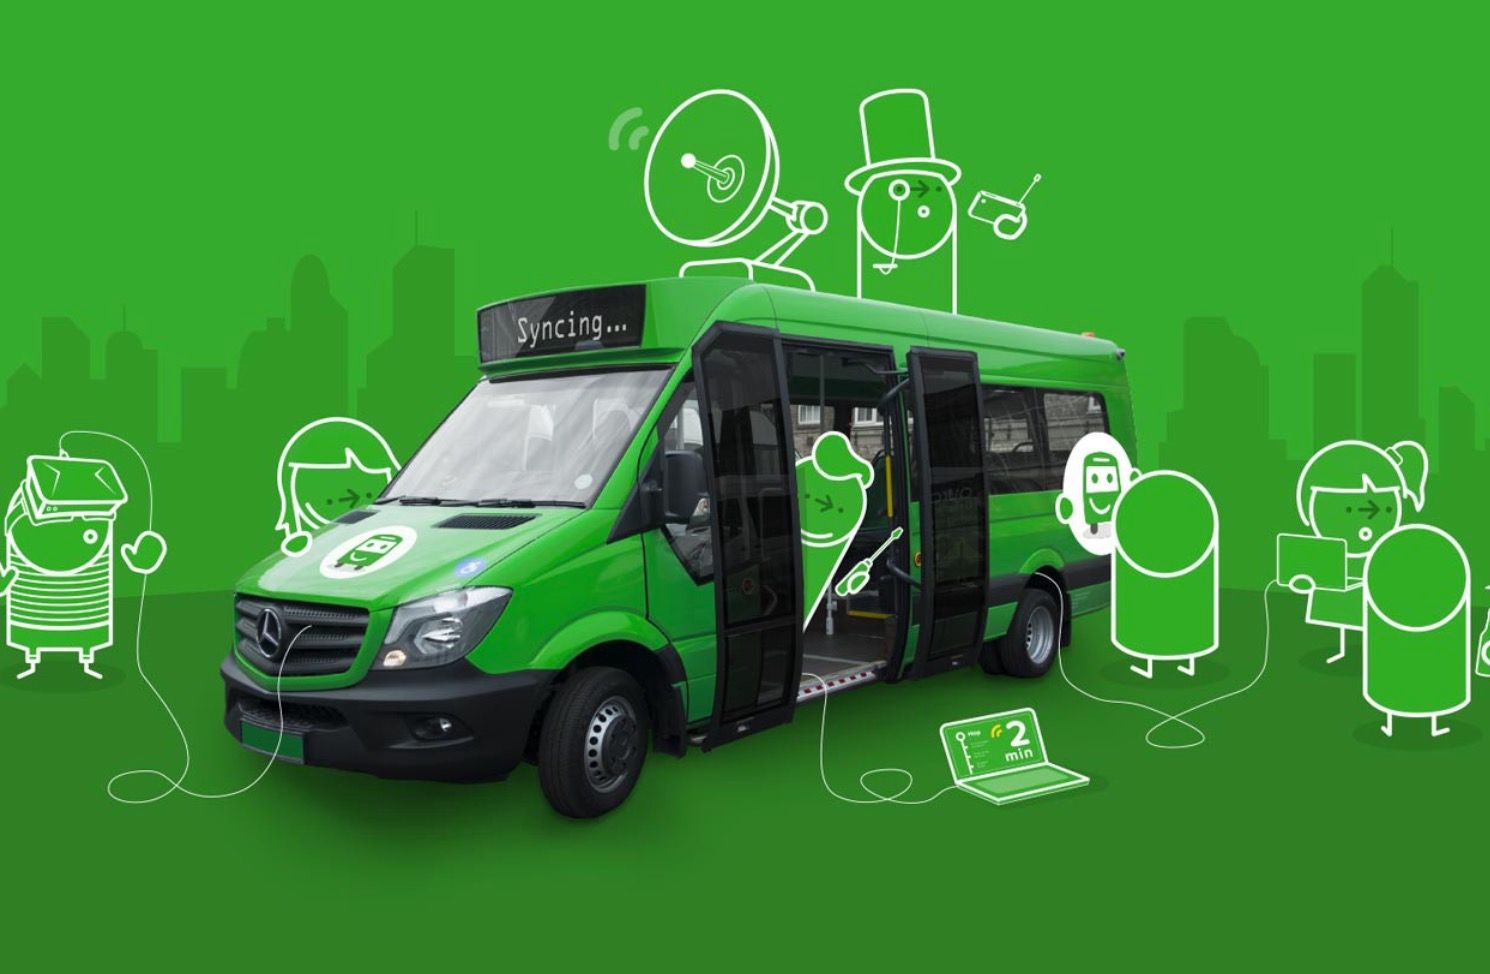 citymapper to trial its own smart bus transportation service in london image 1